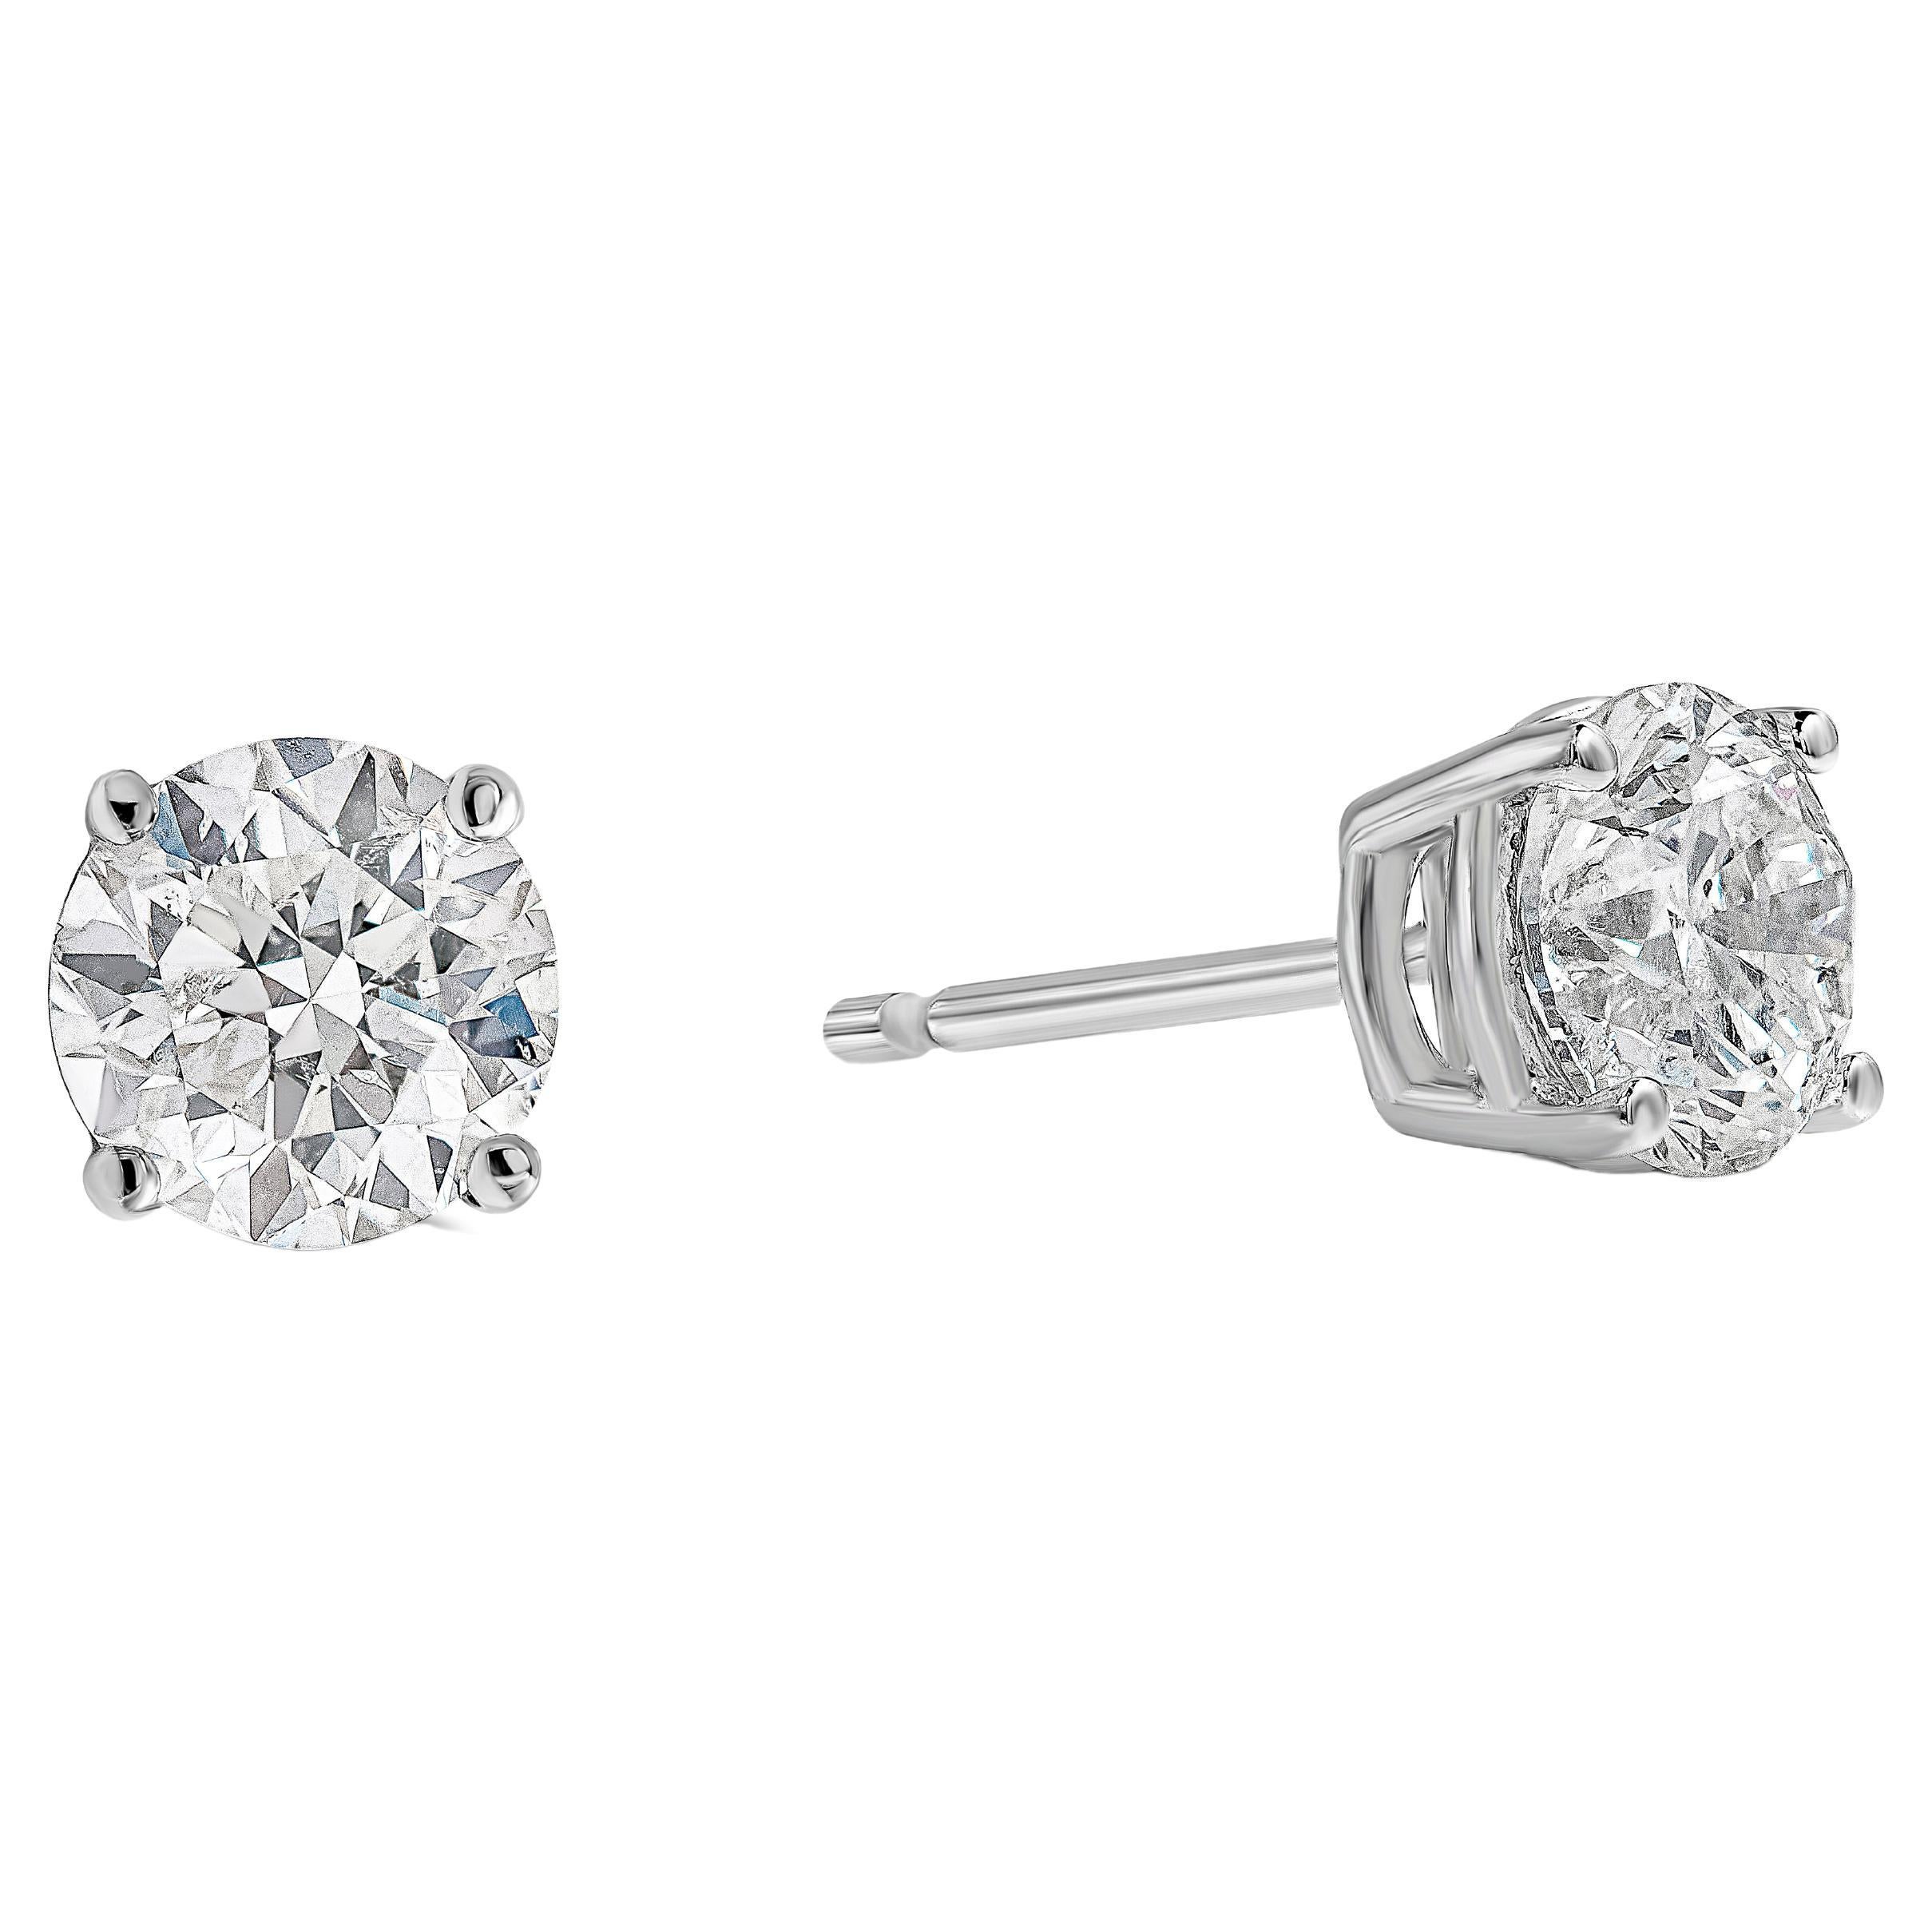 A classic pair of earrings showcasing two brilliant round diamonds, each set in a single 18k white gold four prong basket setting. Diamonds weigh 1.63 carats total and are approximately F-G color, SI3 in clarity.

Style available in different price